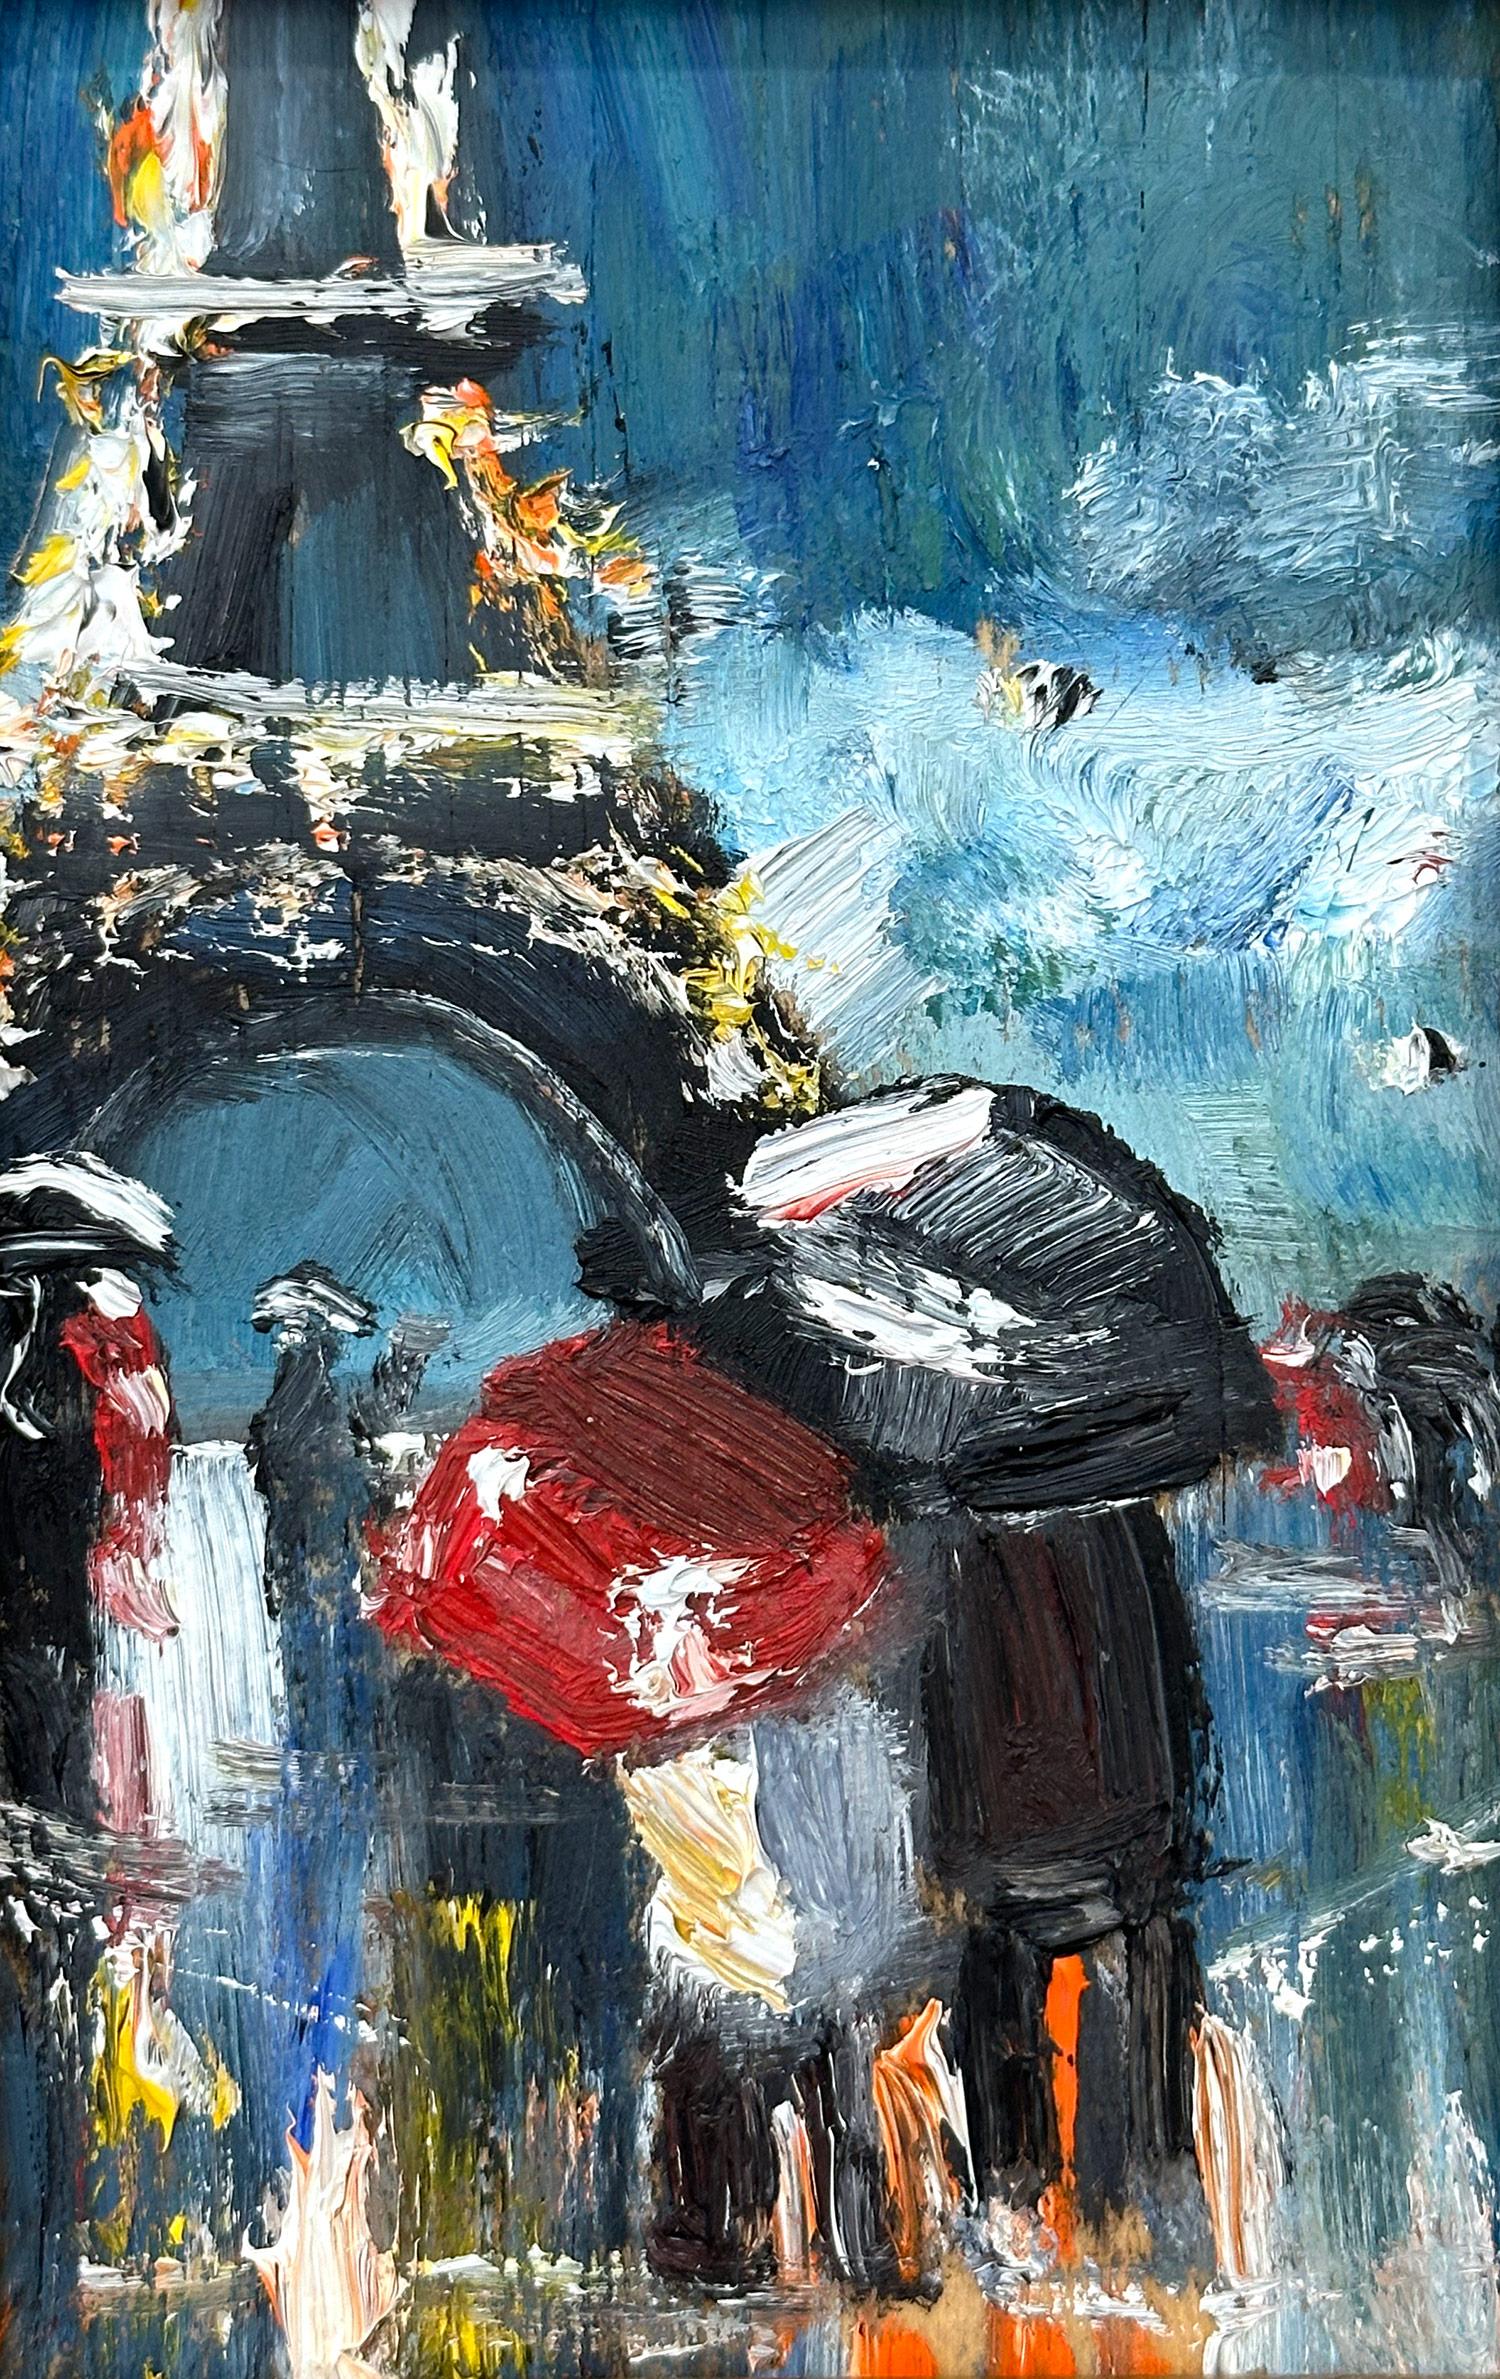 This painting depicts an impressionistic Plein Air scene of a couple under an umbrella by the Eiffel Tower in the rain. The thick brush strokes and fun marks creates an atmosphere reminiscent of the Ashcan School. There are figures situated in the